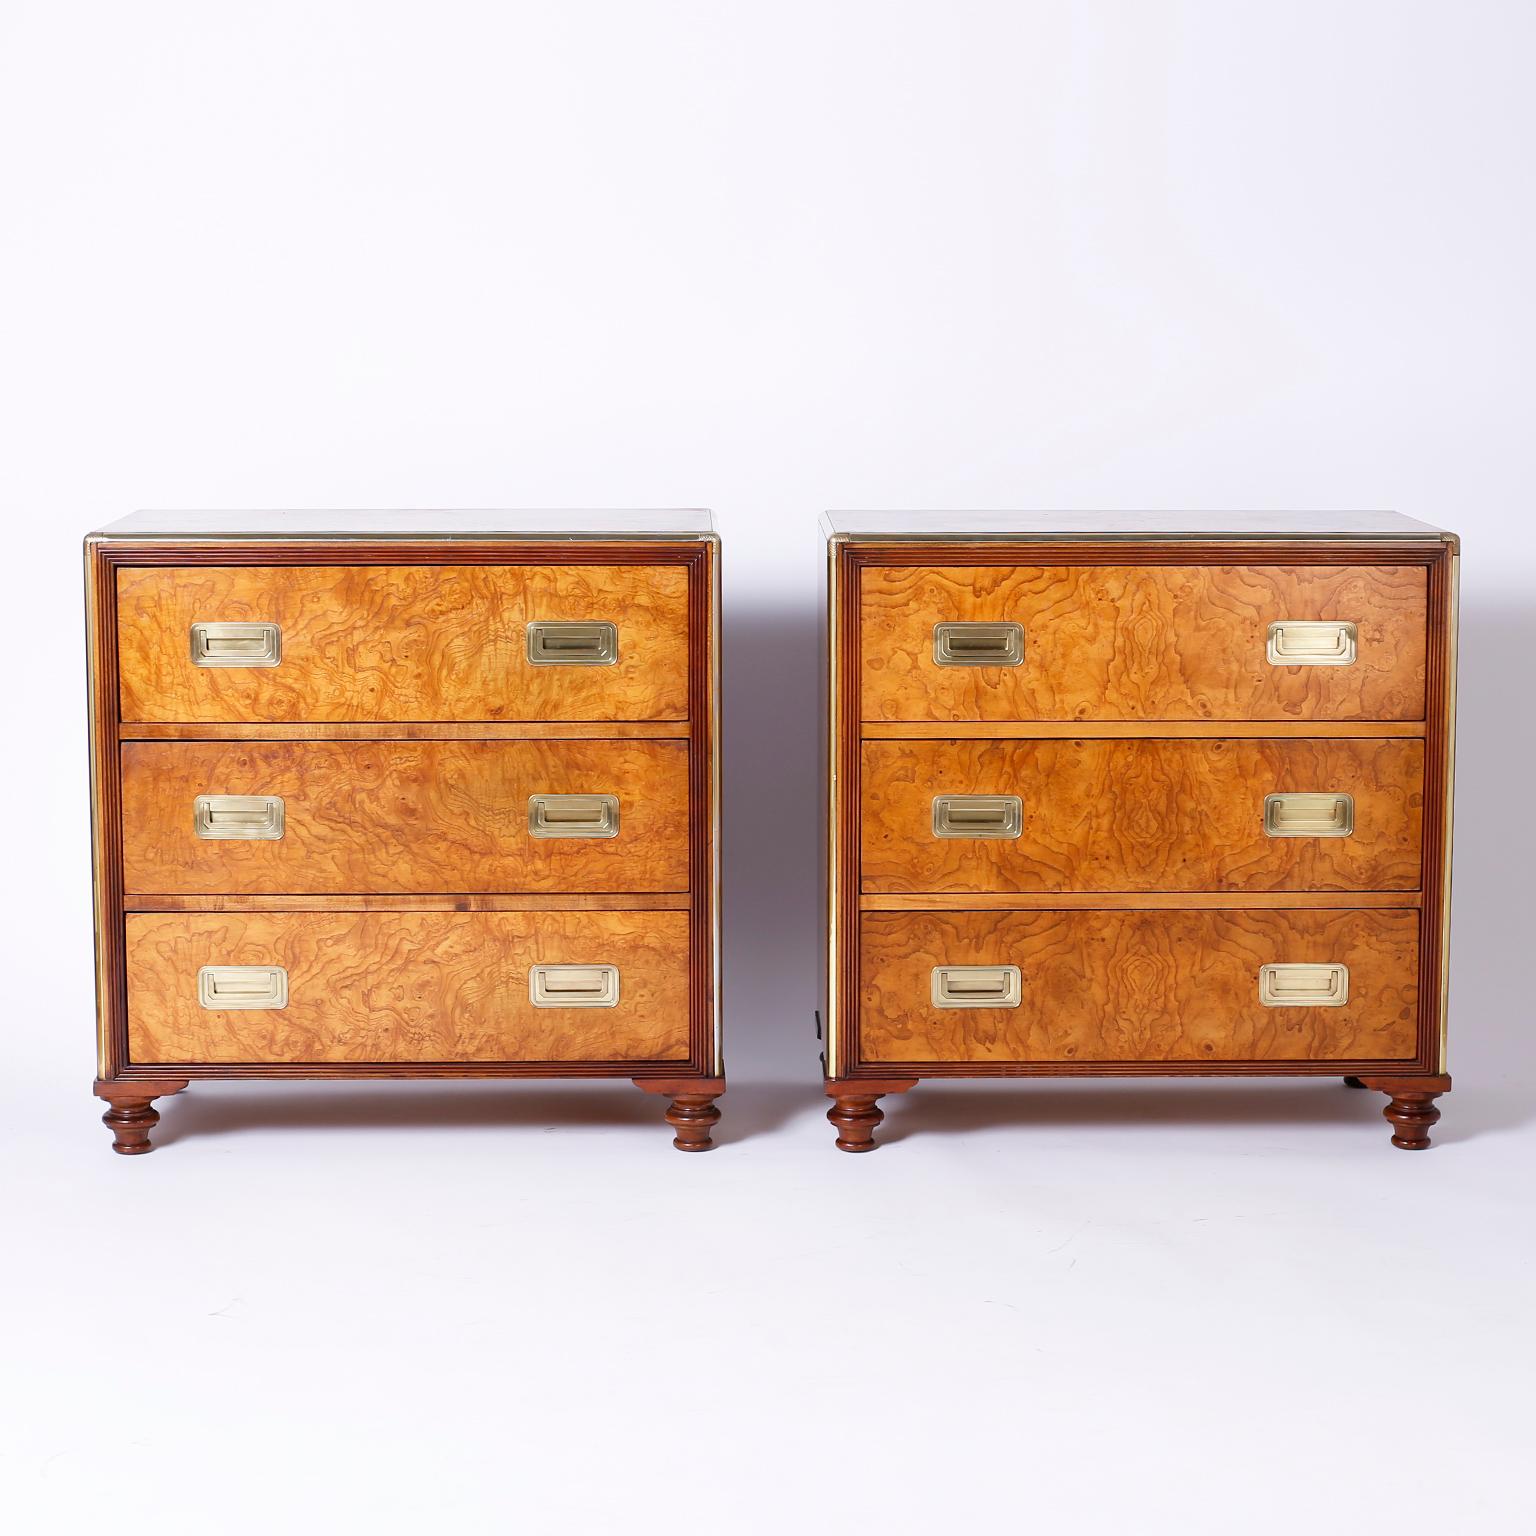 Refined pair of Campaign style three-drawer chests crafted in exotic burled walnut with brass hardware and turned feet. Perfect combination of traditional and modern. Signed Baker in a drawer.